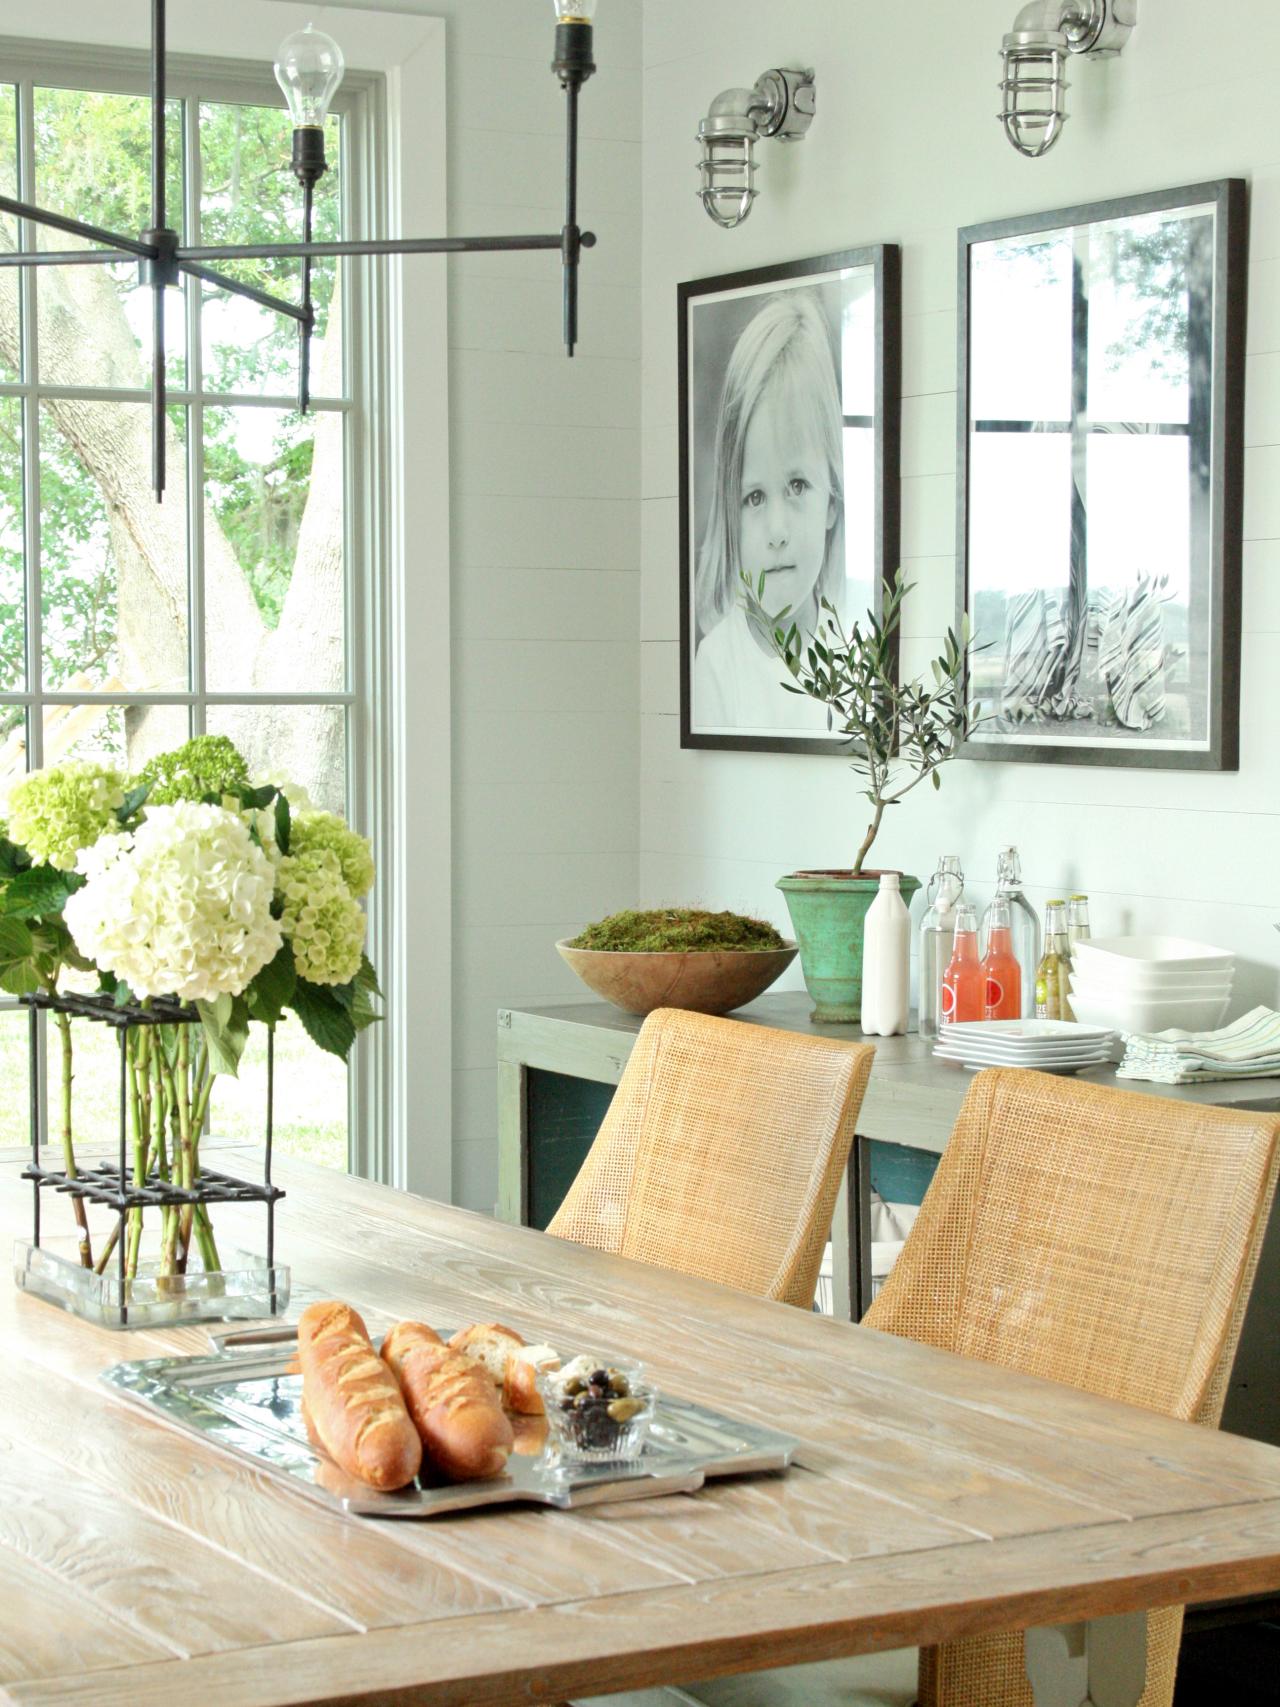 15 Ways to Dress Up Your Dining Room Walls | HGTV's Decorating & Design